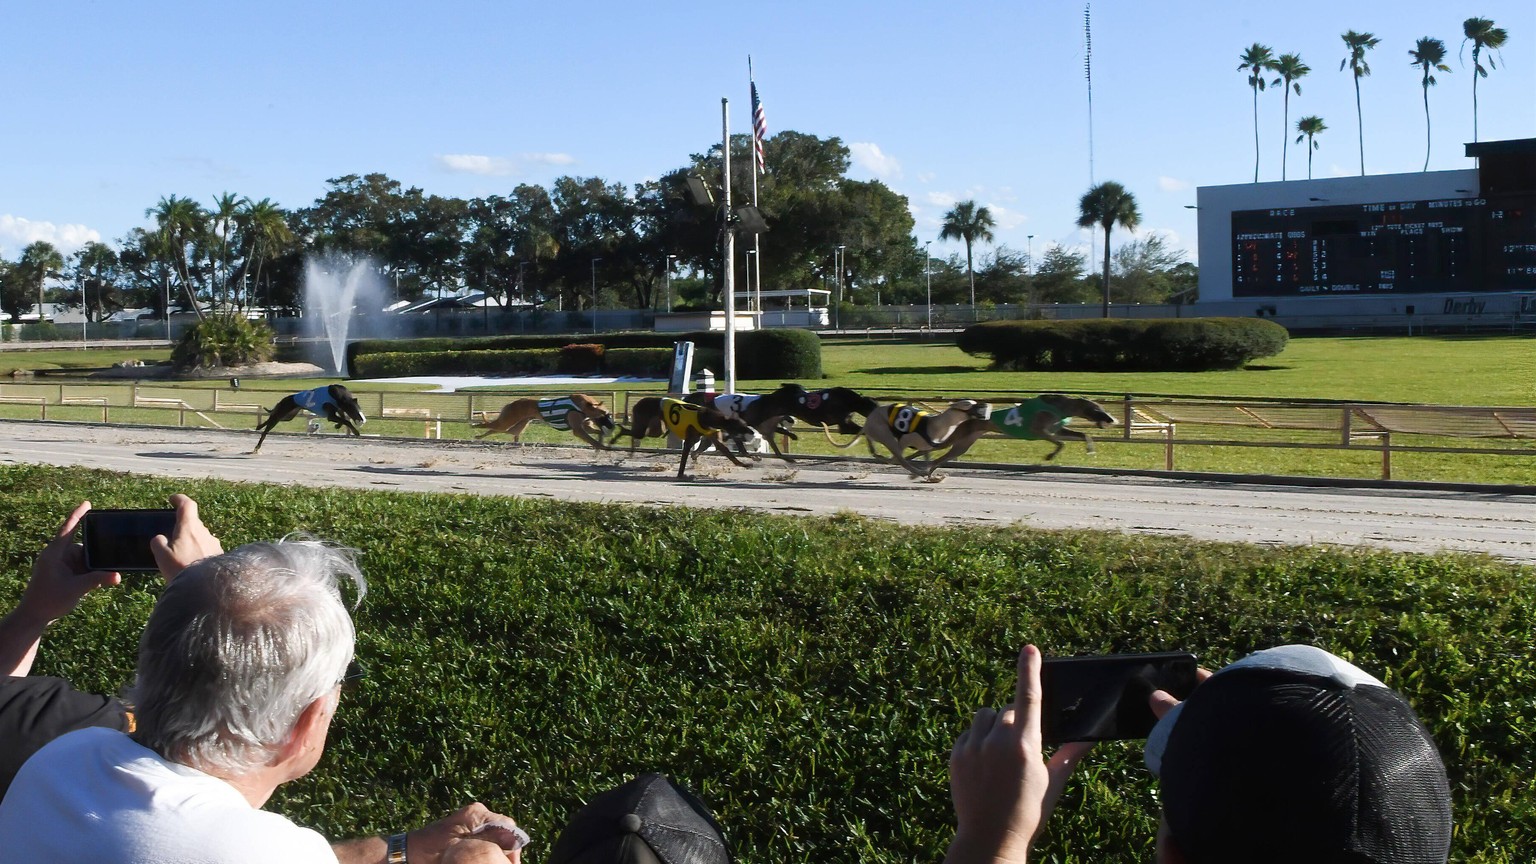 December 27, 2020, St. Petersburg, Florida, United States: Racing fans watch as greyhounds cross the finishing line during the final program of greyhound races at Derby Lane, the oldest continuously o ...